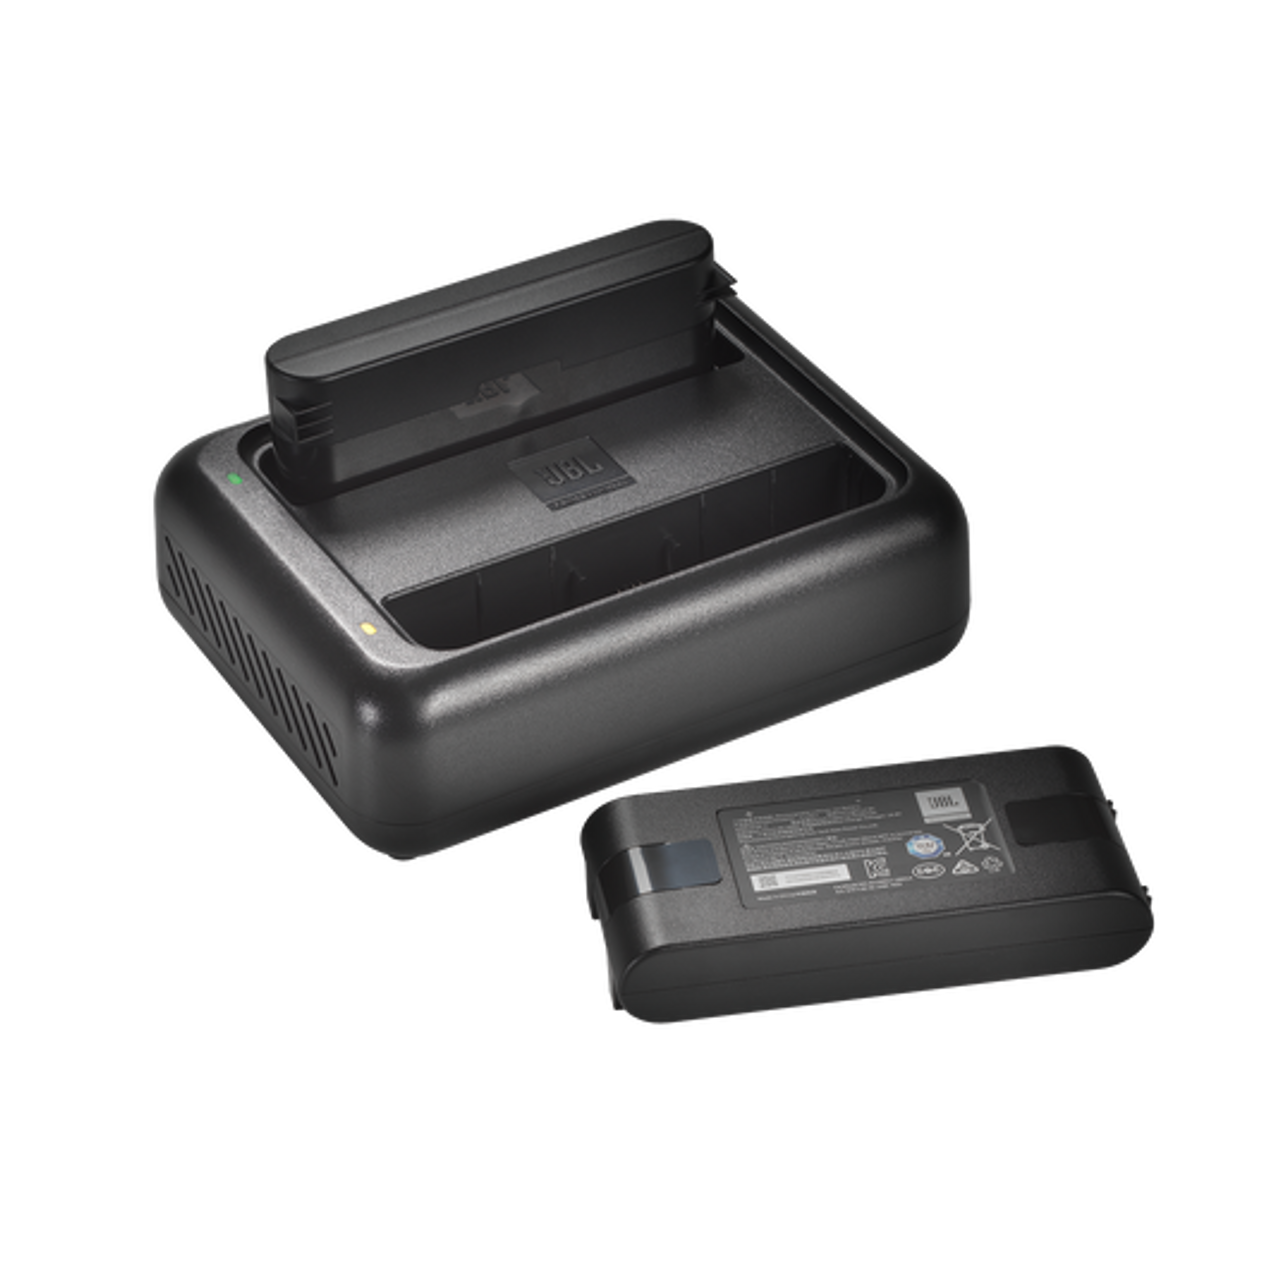 JBL EONONECOMP-CHGR-NA Compact Dual Battery Charger For EON ONE